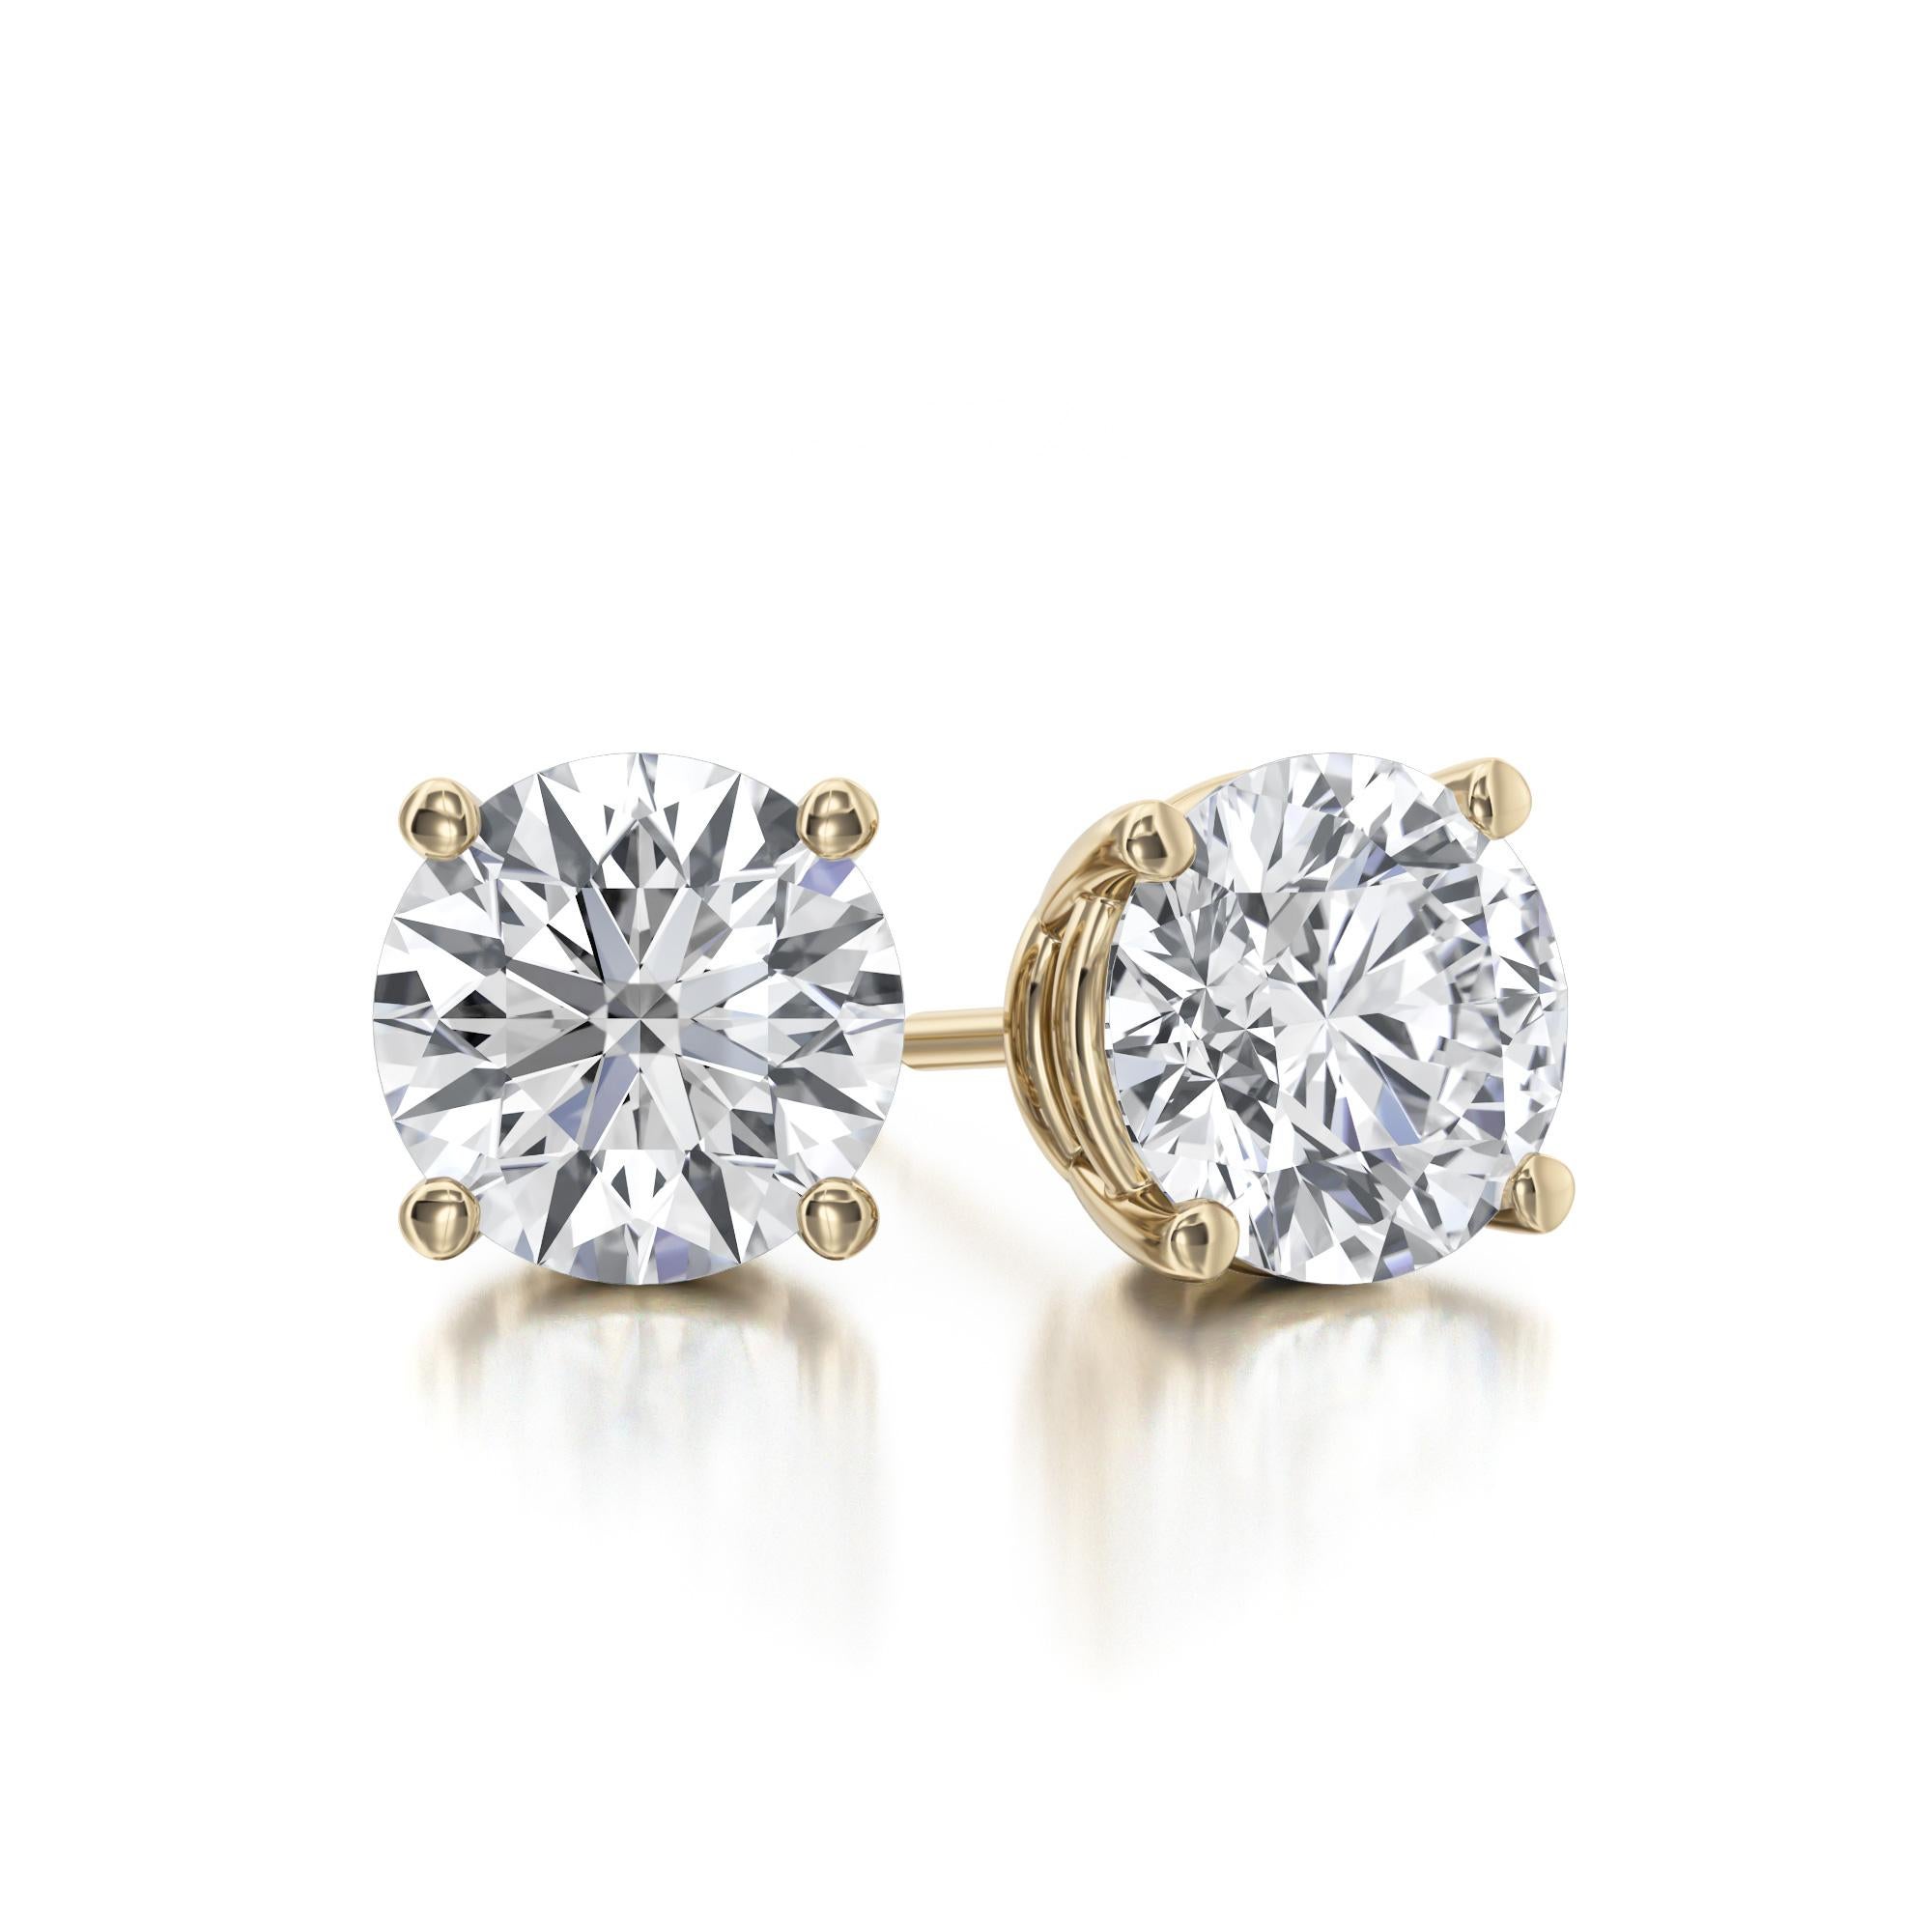 Classic Four Prong Basket Diamond Stud Earrings, featuring:
✧ 2 earth mined diamonds G-H color SI weighing 1.50 carats 
✧ Measurements: 5.75mm*5.75mm
✧ Available in 18K Yellow Gold
✧ Push back friction closure
✧ Free appraisal included with your